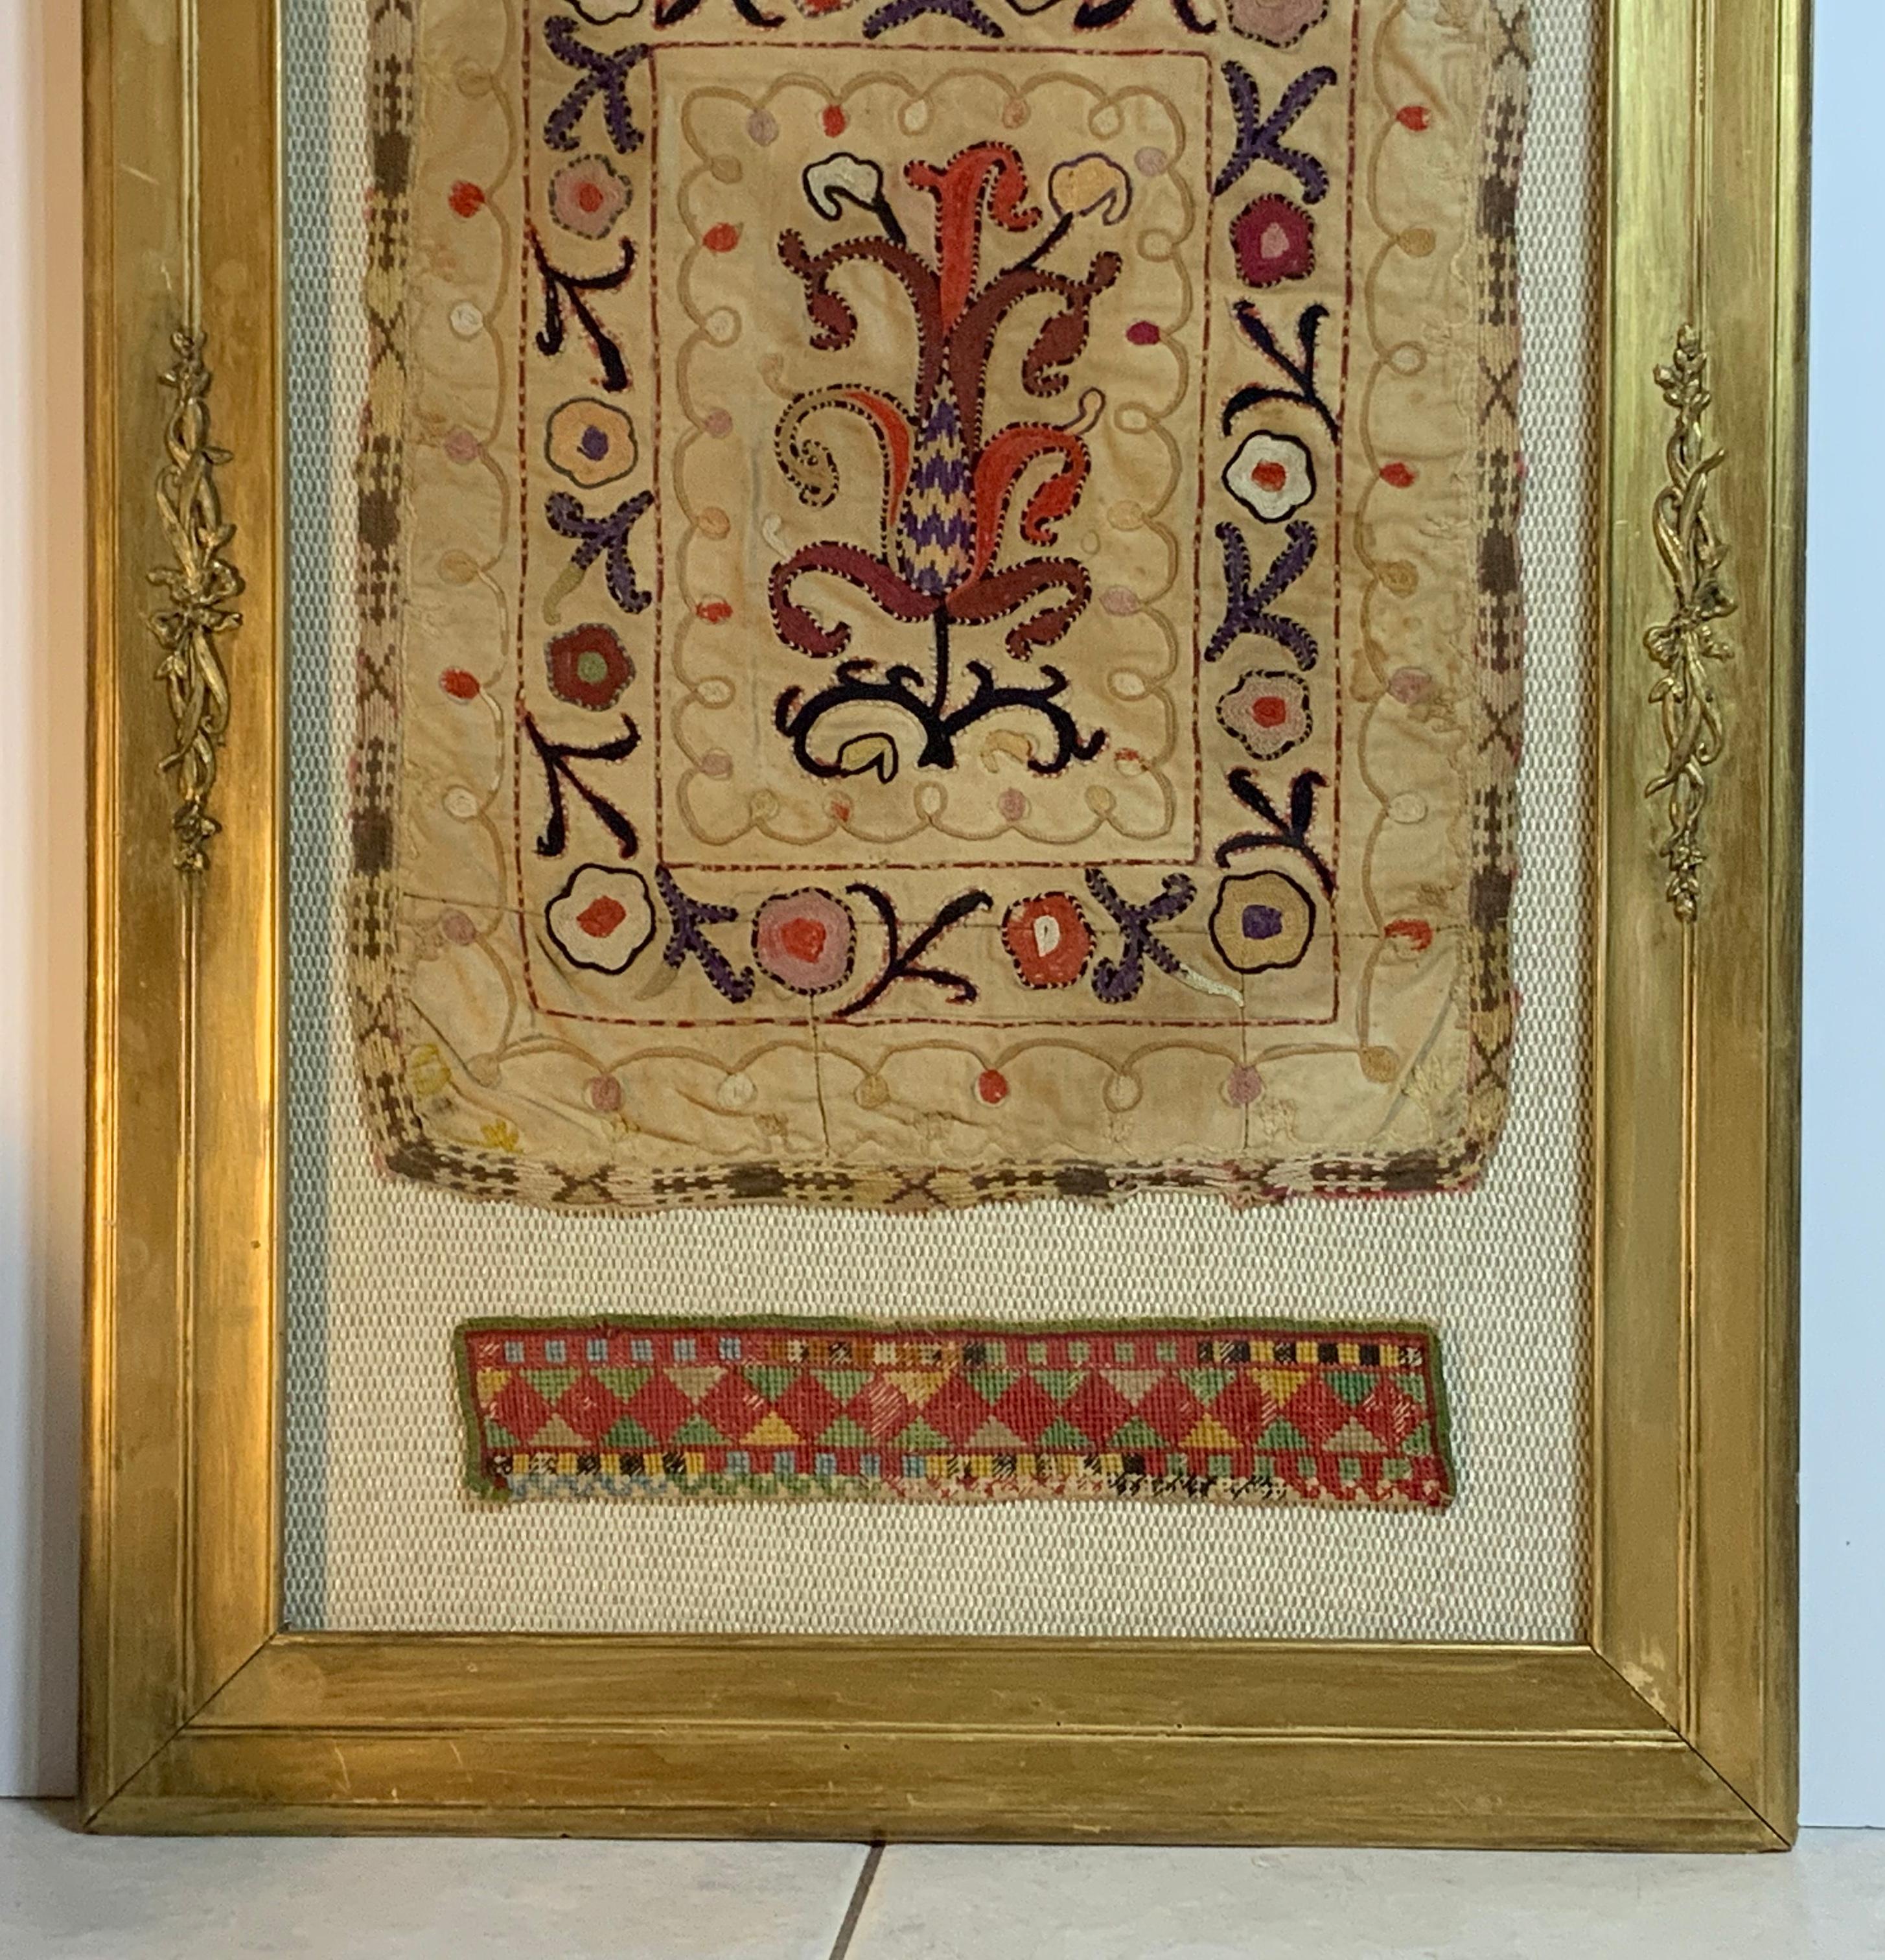 Antique Hand Embroidered Turkmen Suzani Sampler In Shadow Box For Sale 3